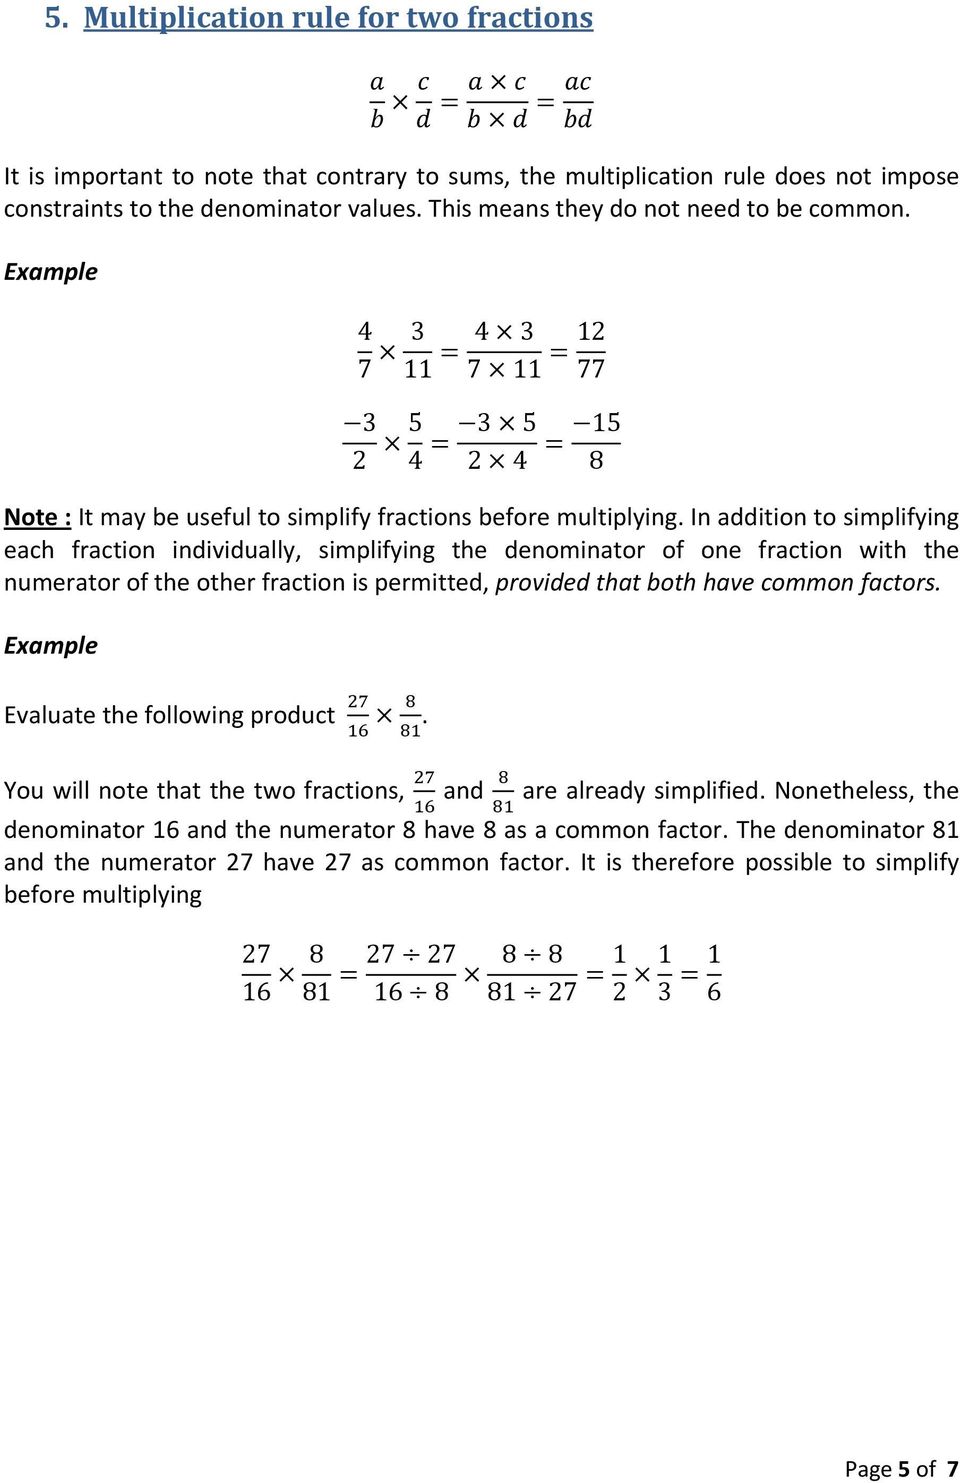 In addition to simplifying each fraction individually, simplifying the denominator of one fraction with the numerator of the other fraction is permitted, provided that both have common factors.